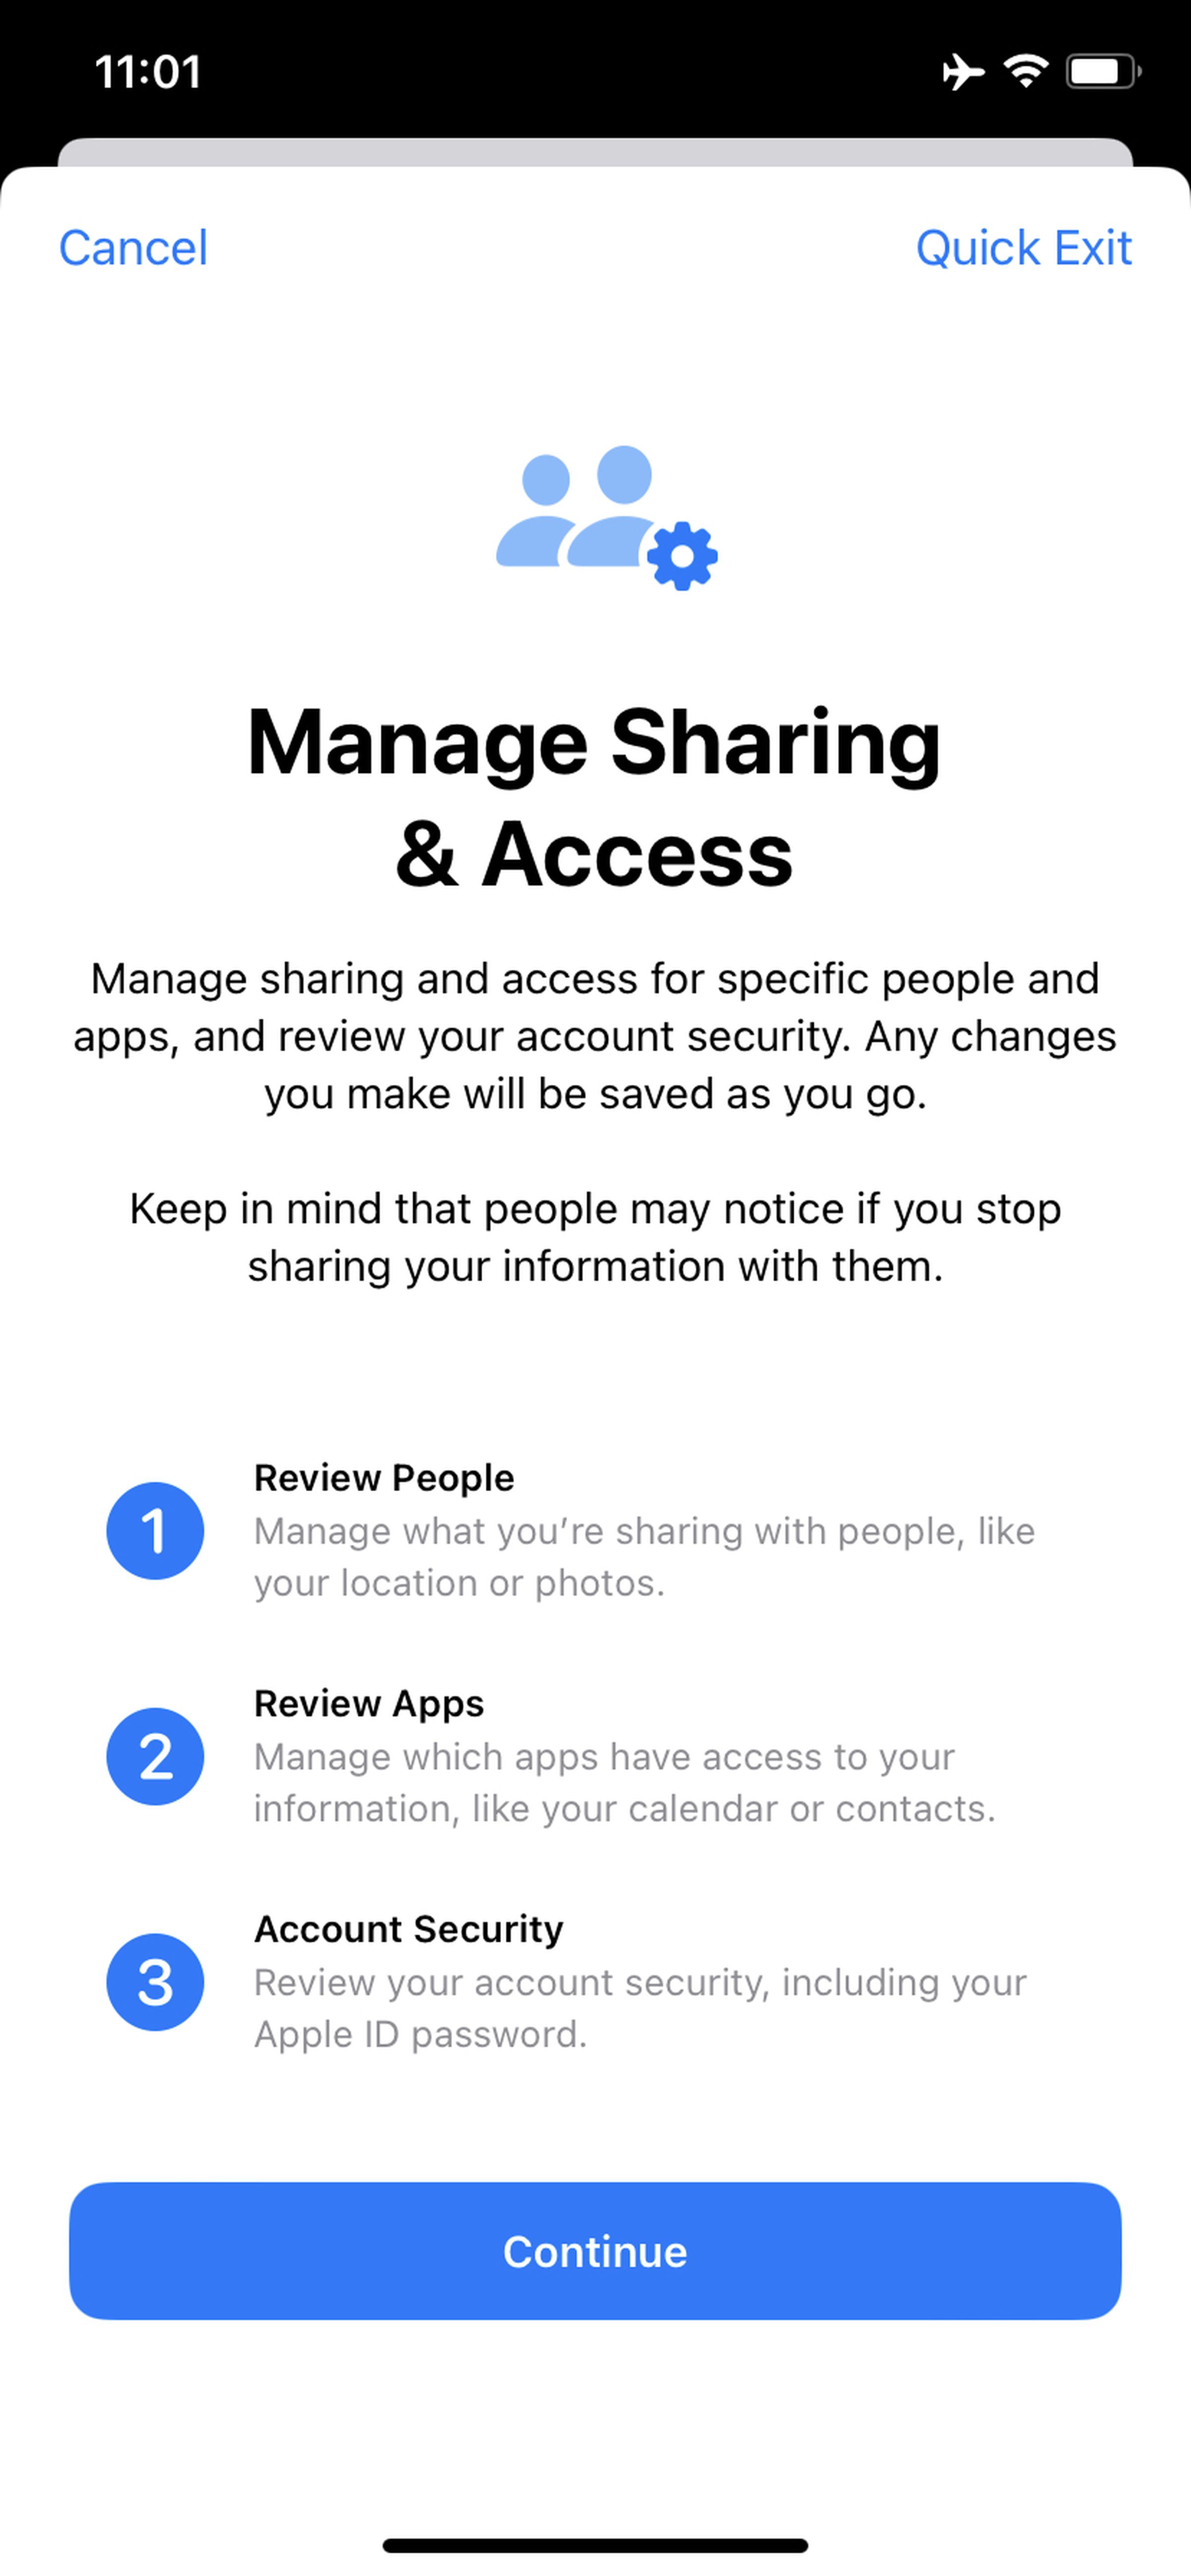 Manage sharing &amp; access page